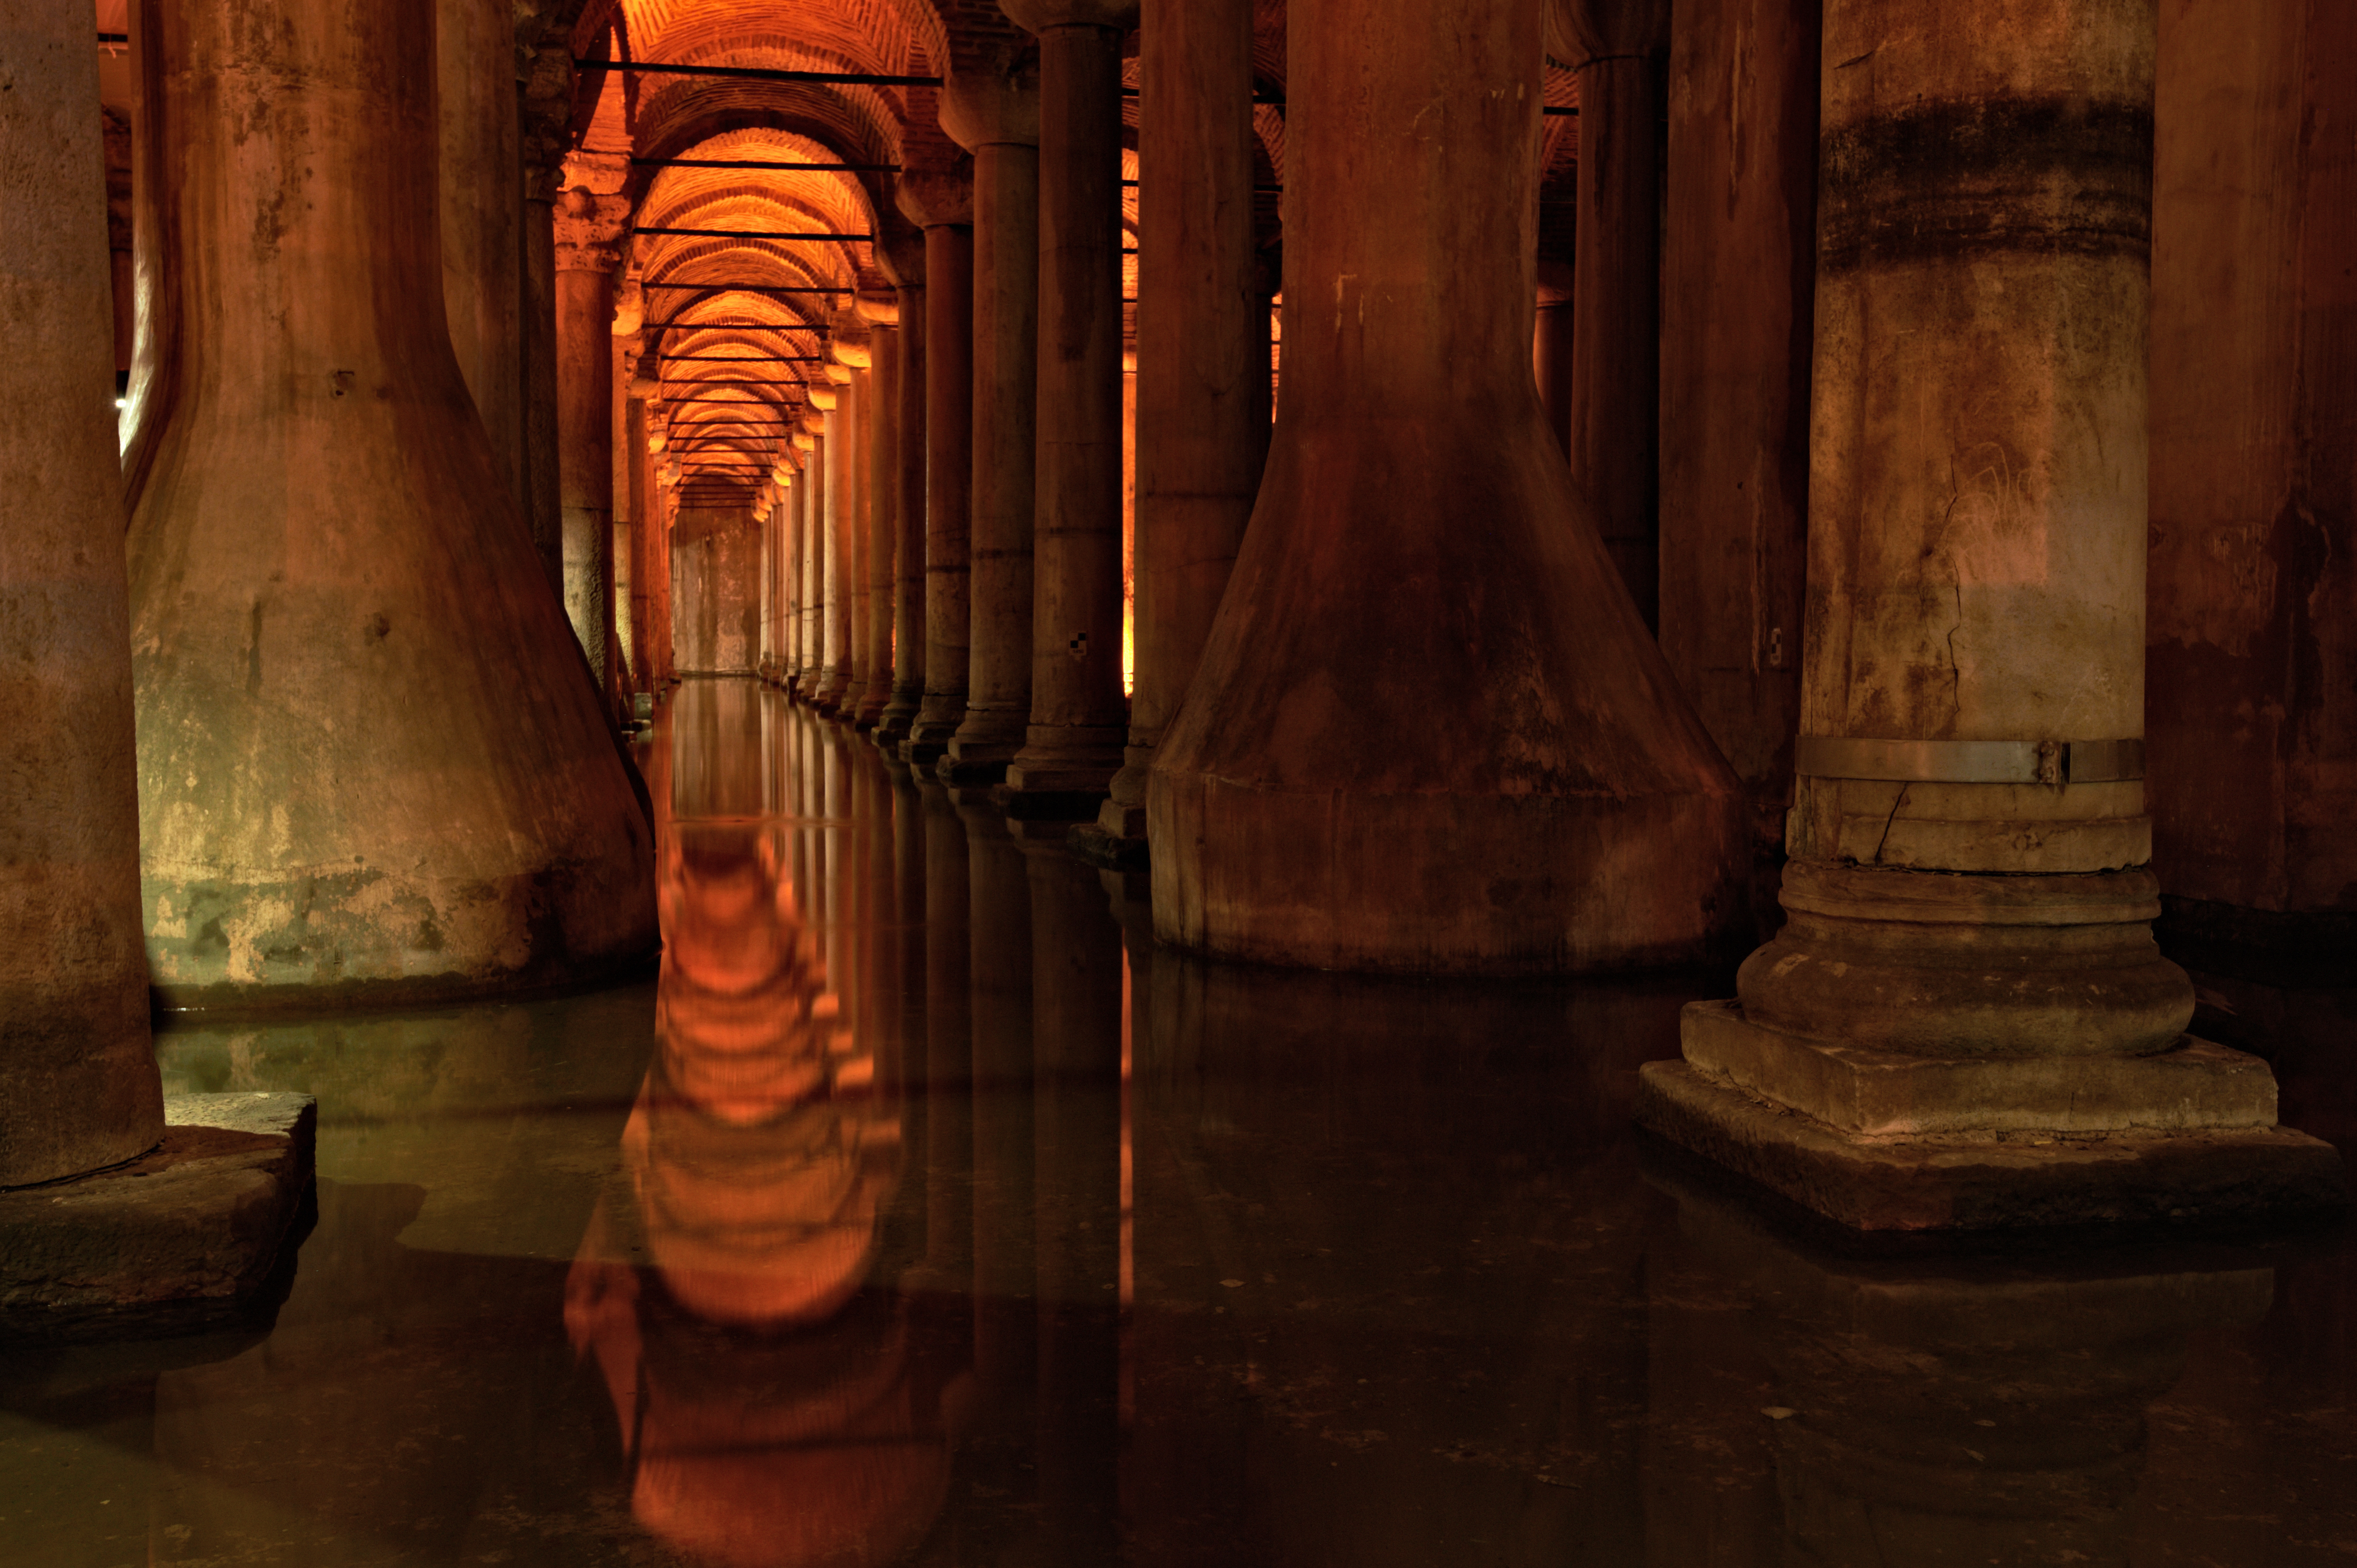 Basilica Cistern: Exploring centuries of aqueducts, cisterns and innovation